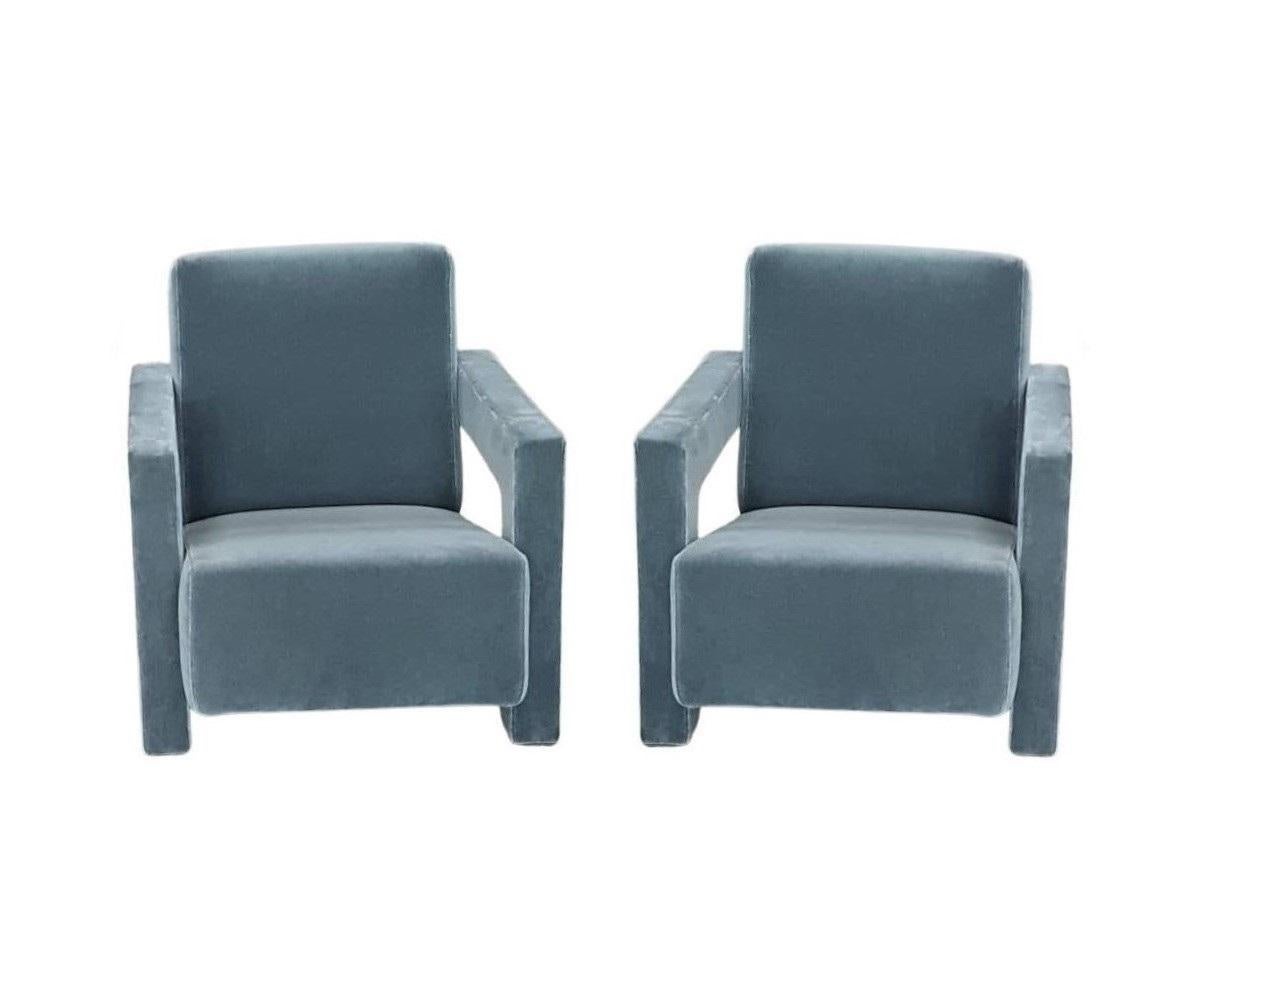 Late 20th Century Pair 637 Utrecht Armchairs in a Dust Blue Mohair by Rietveld for Cassina